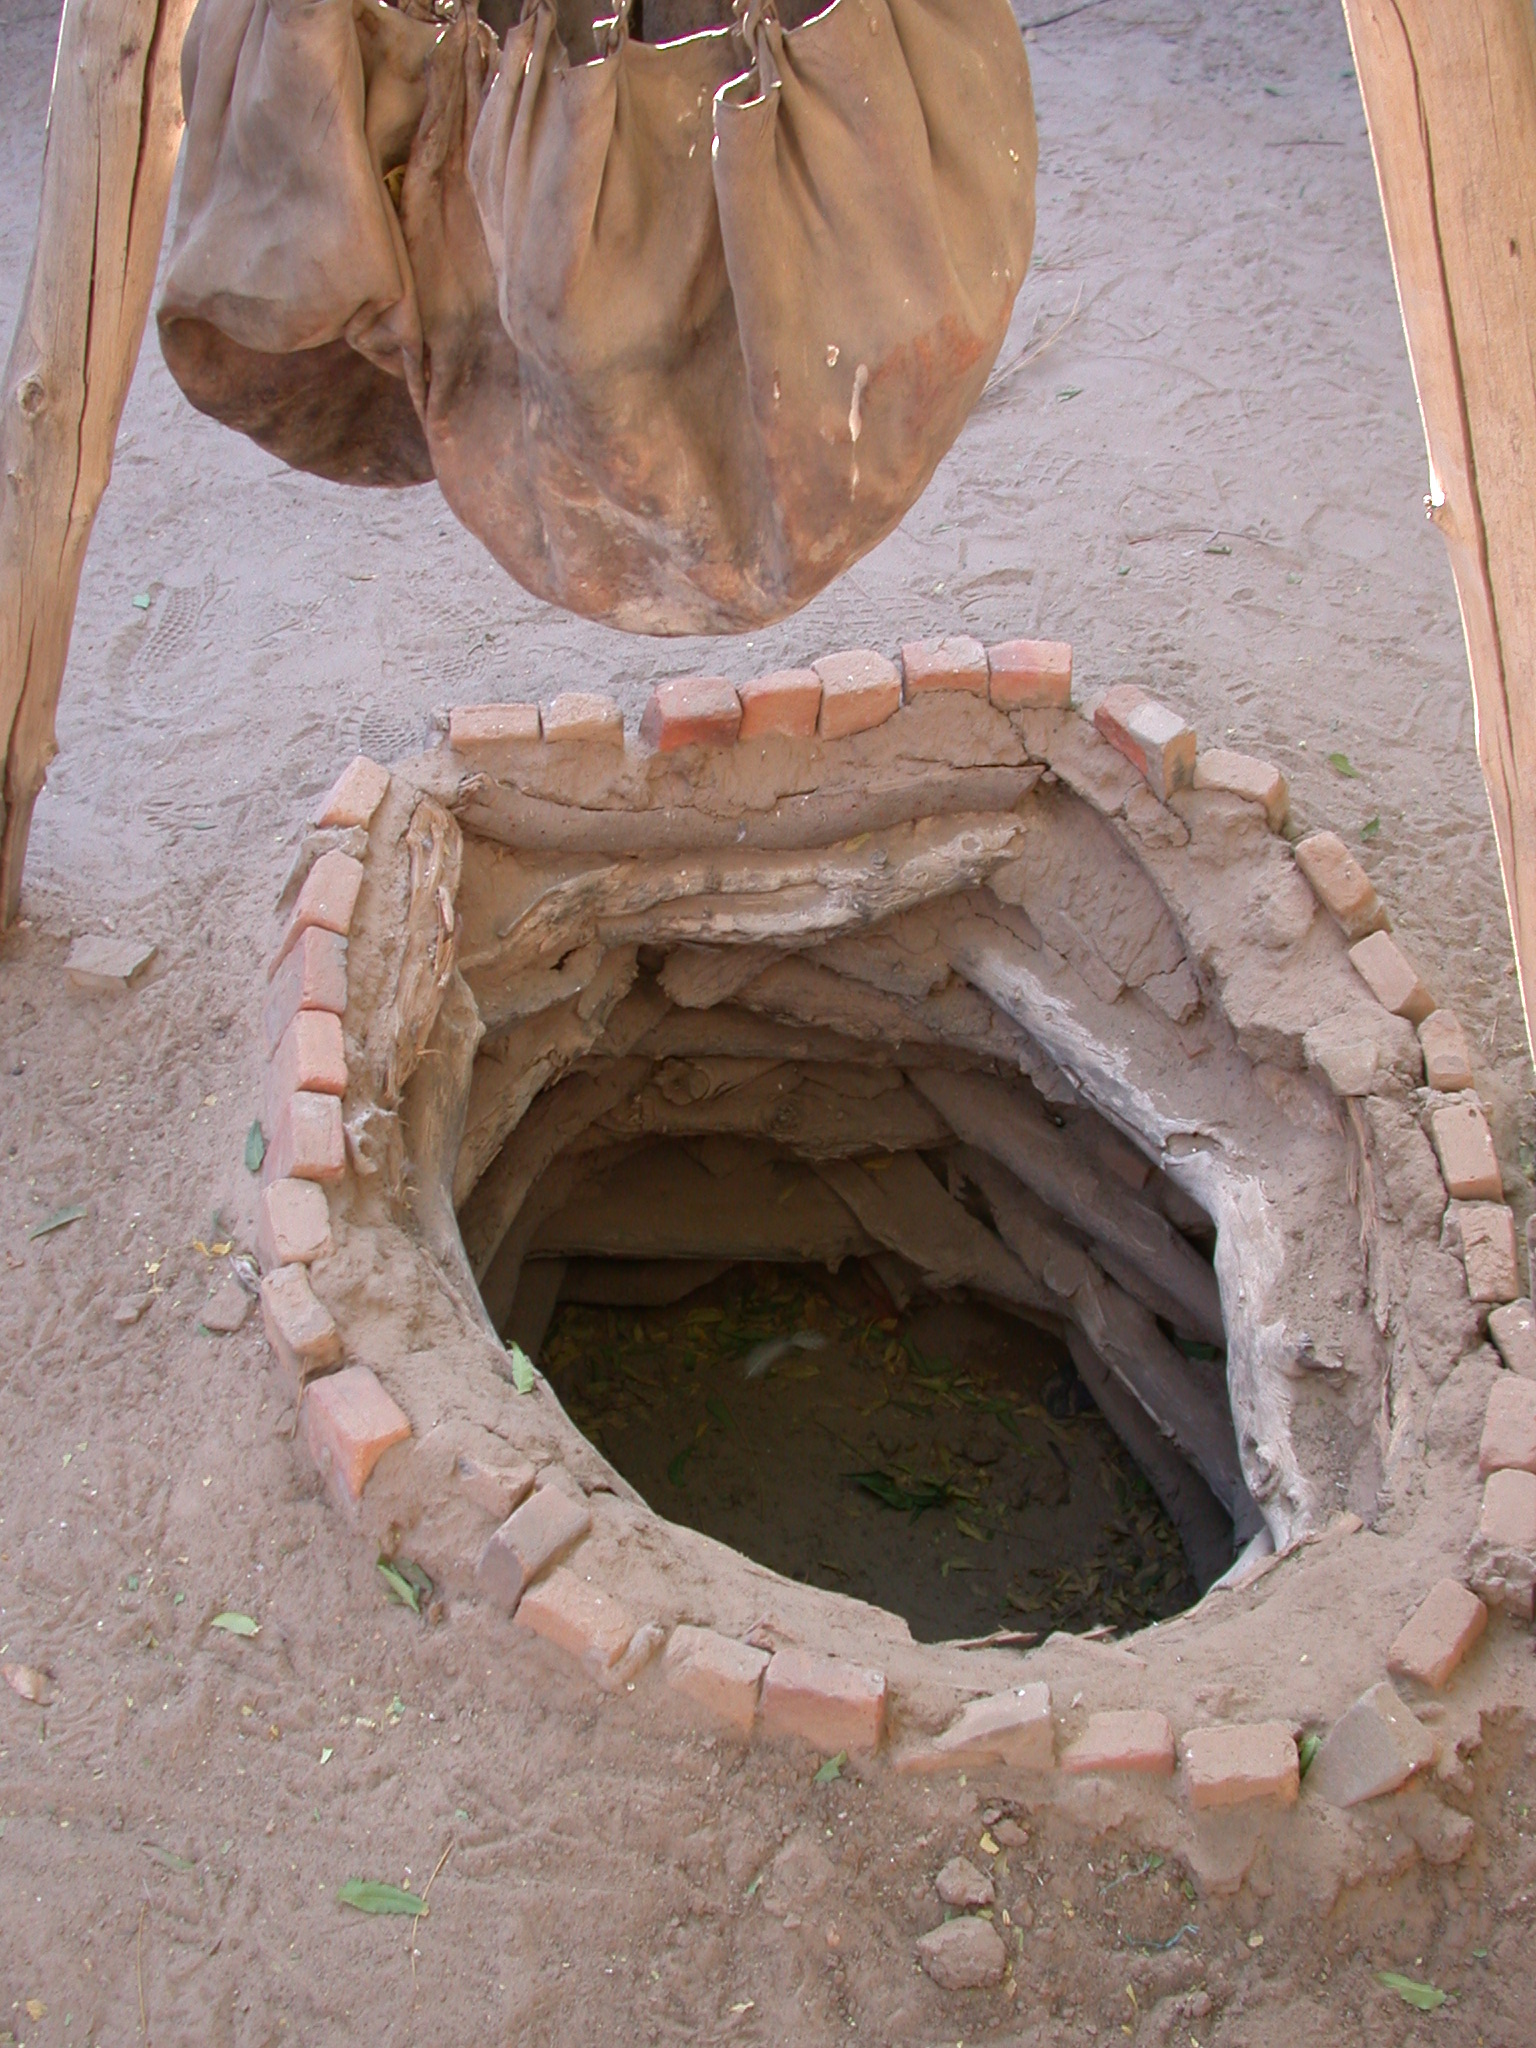 Replica of Well at Reputed Site of Well of Boctou Whence Timbuktu Got Its Name, Timbuktu, Mali